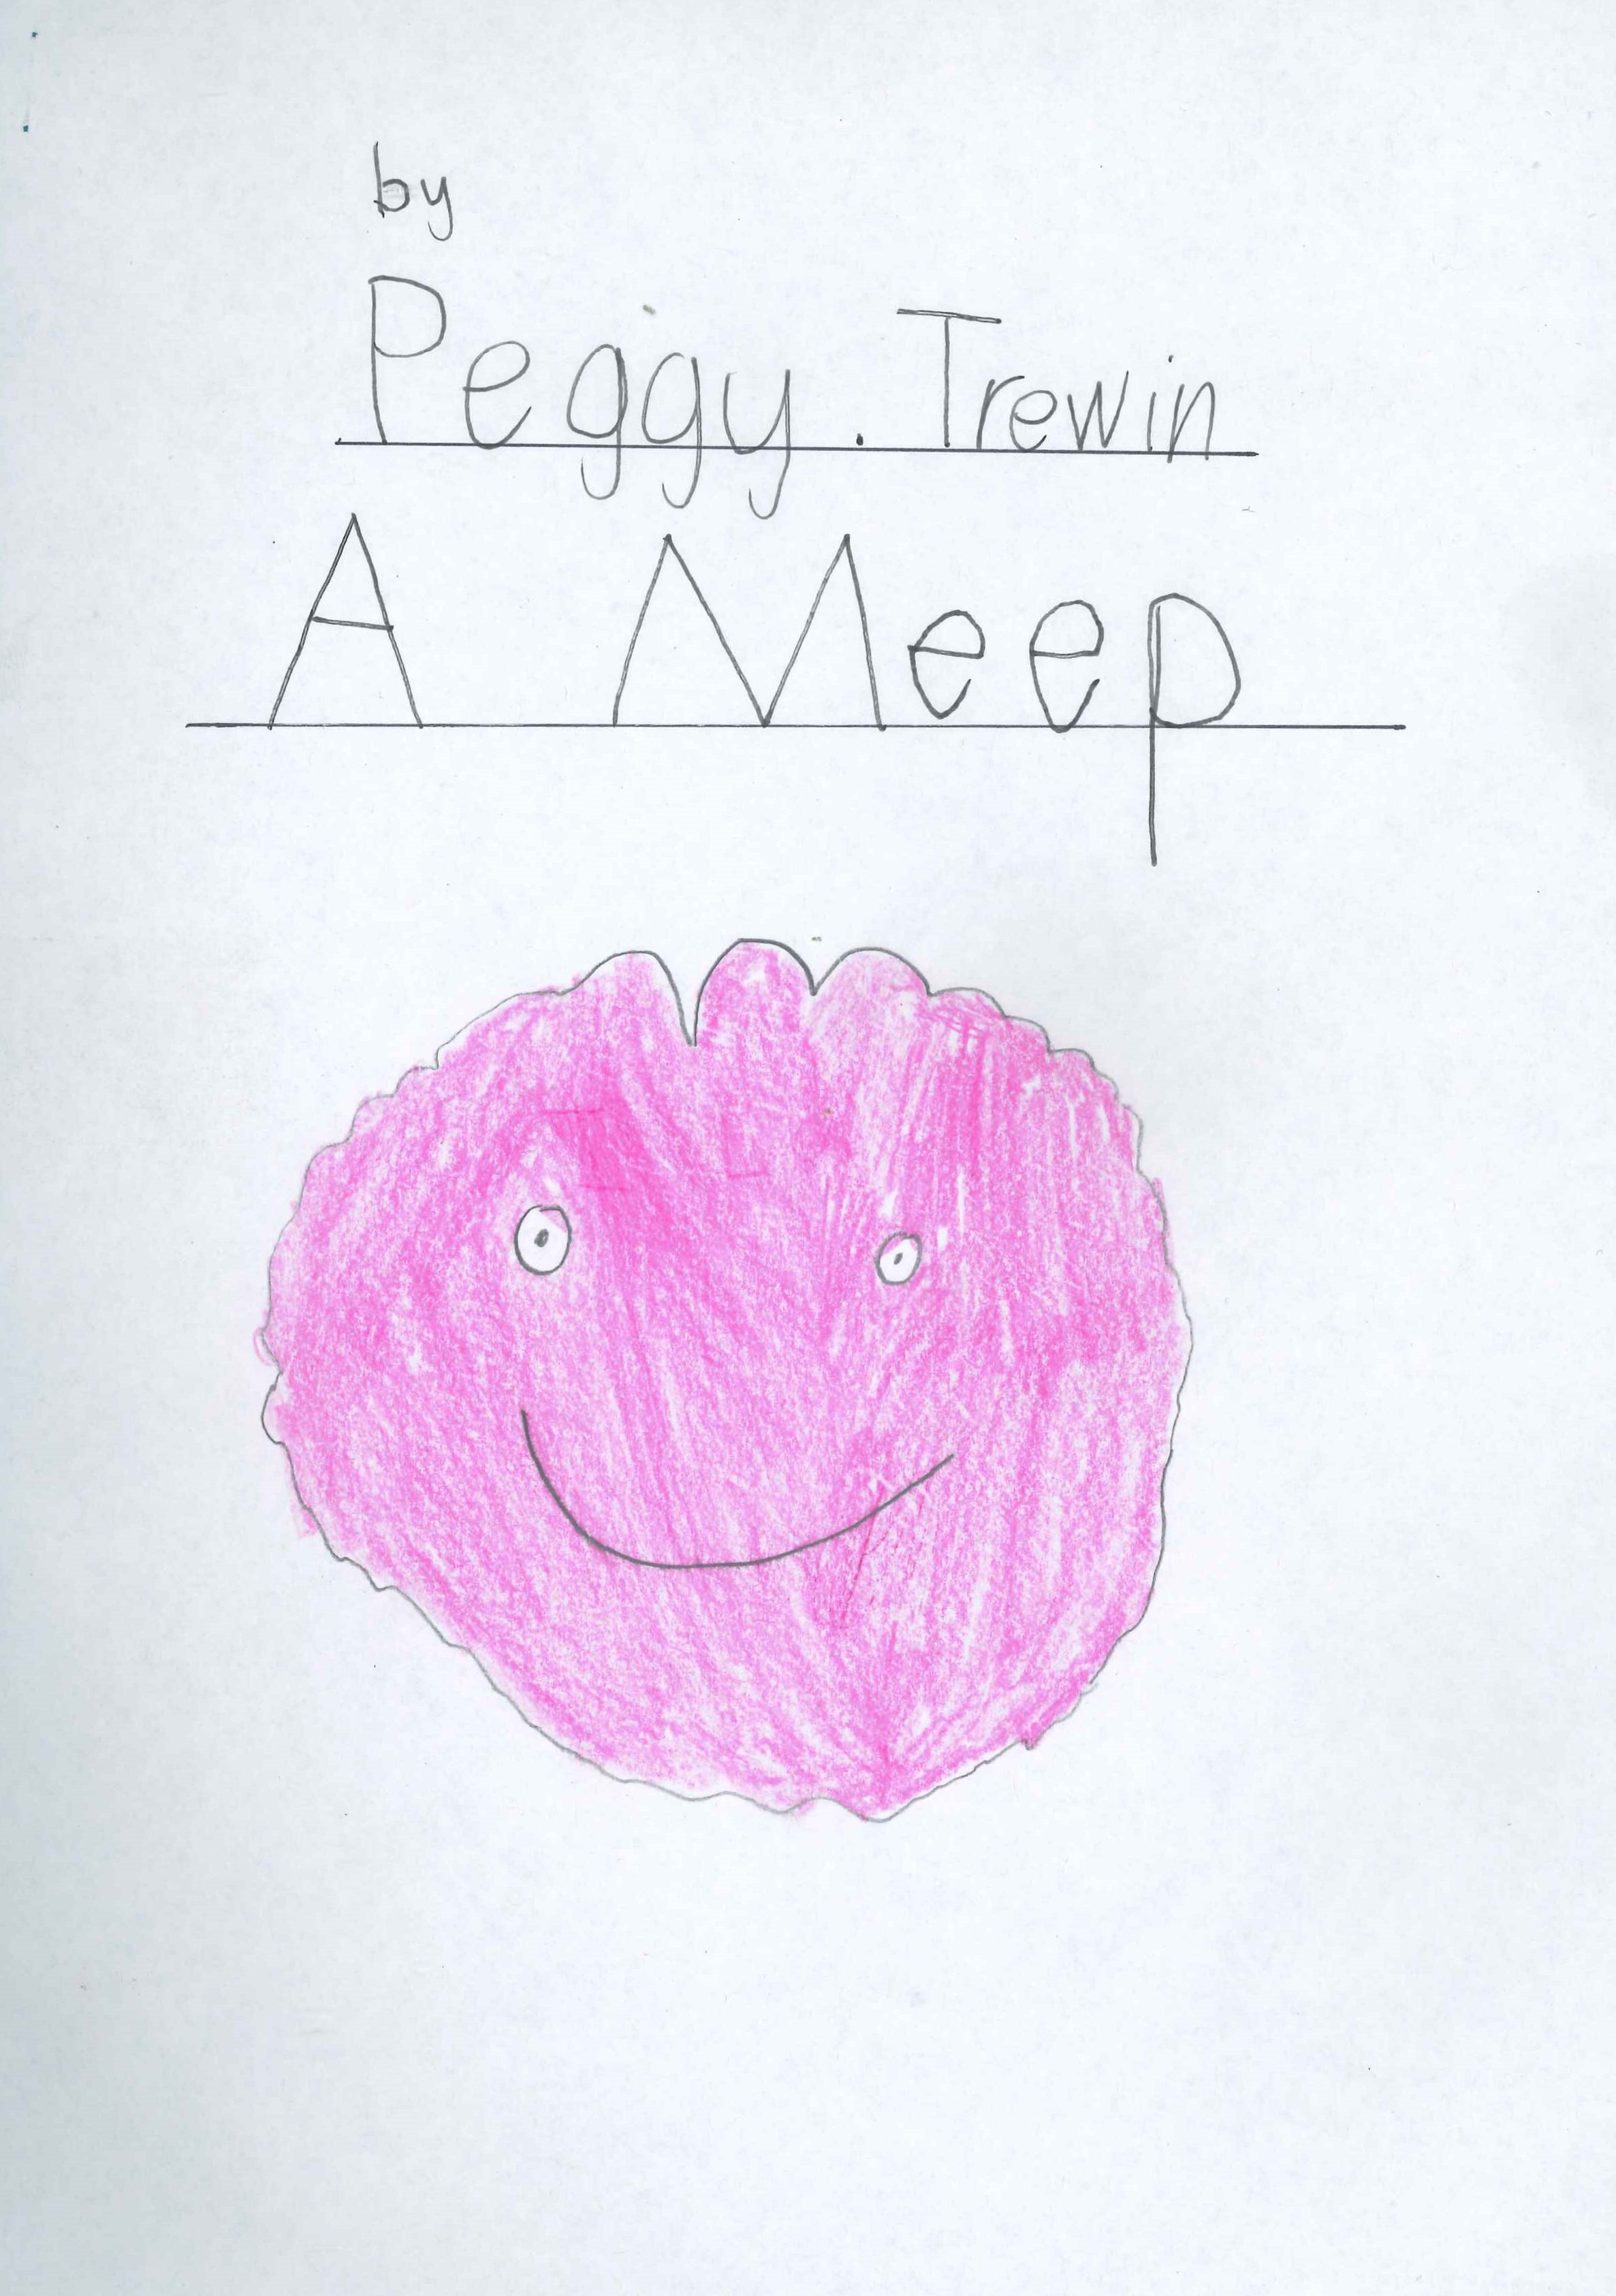 book cover with a pink, fluffy round creature smiling